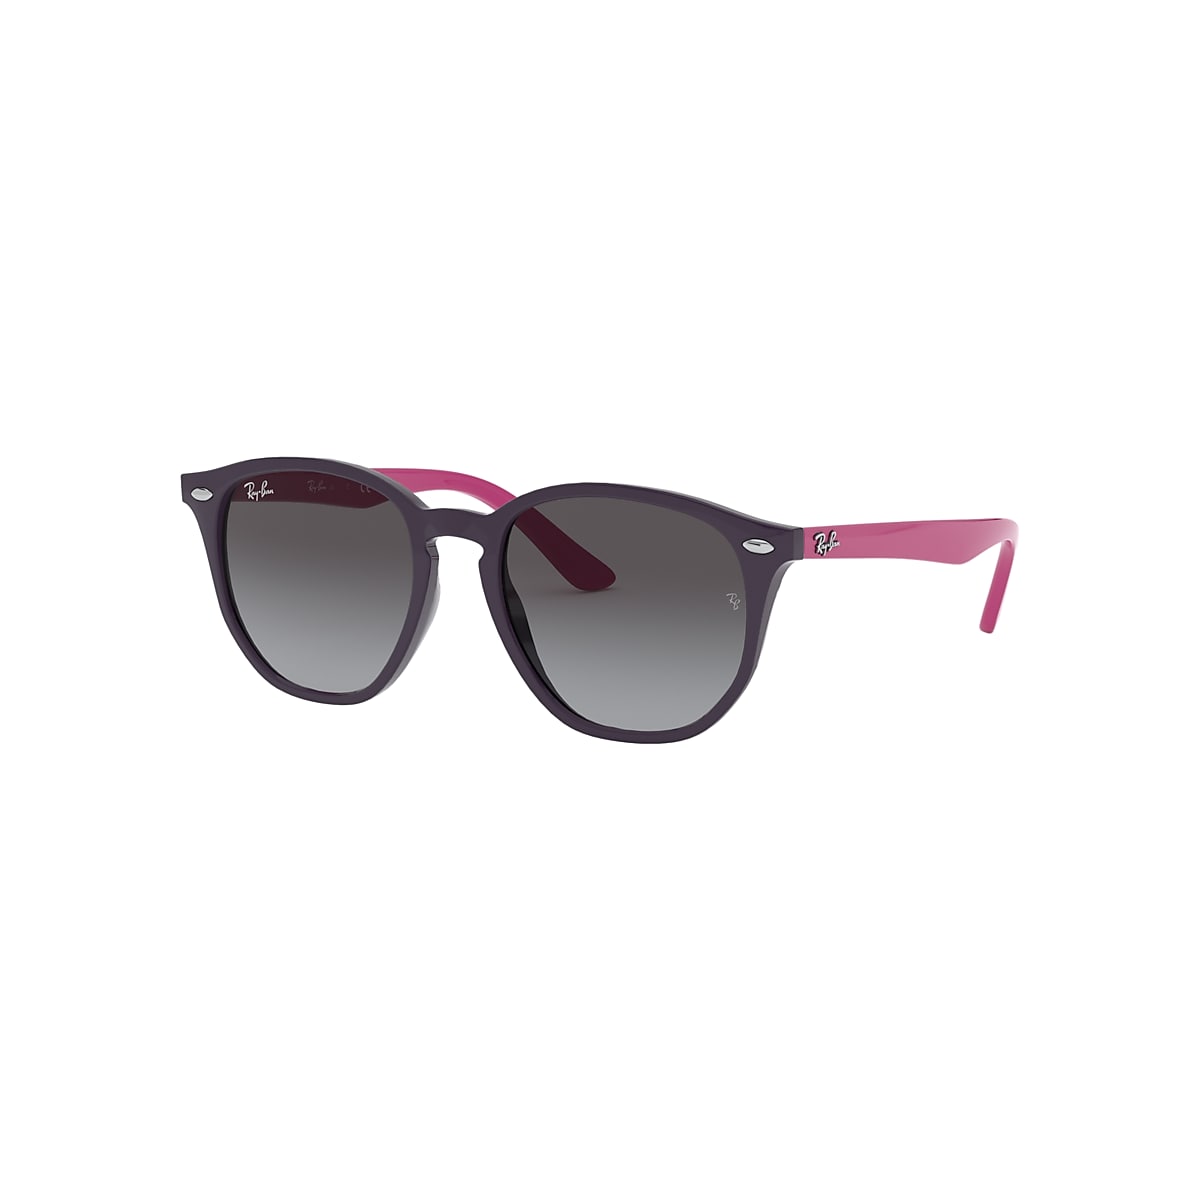 RB9070S KIDS Sunglasses in Violet and Grey - RB9070S